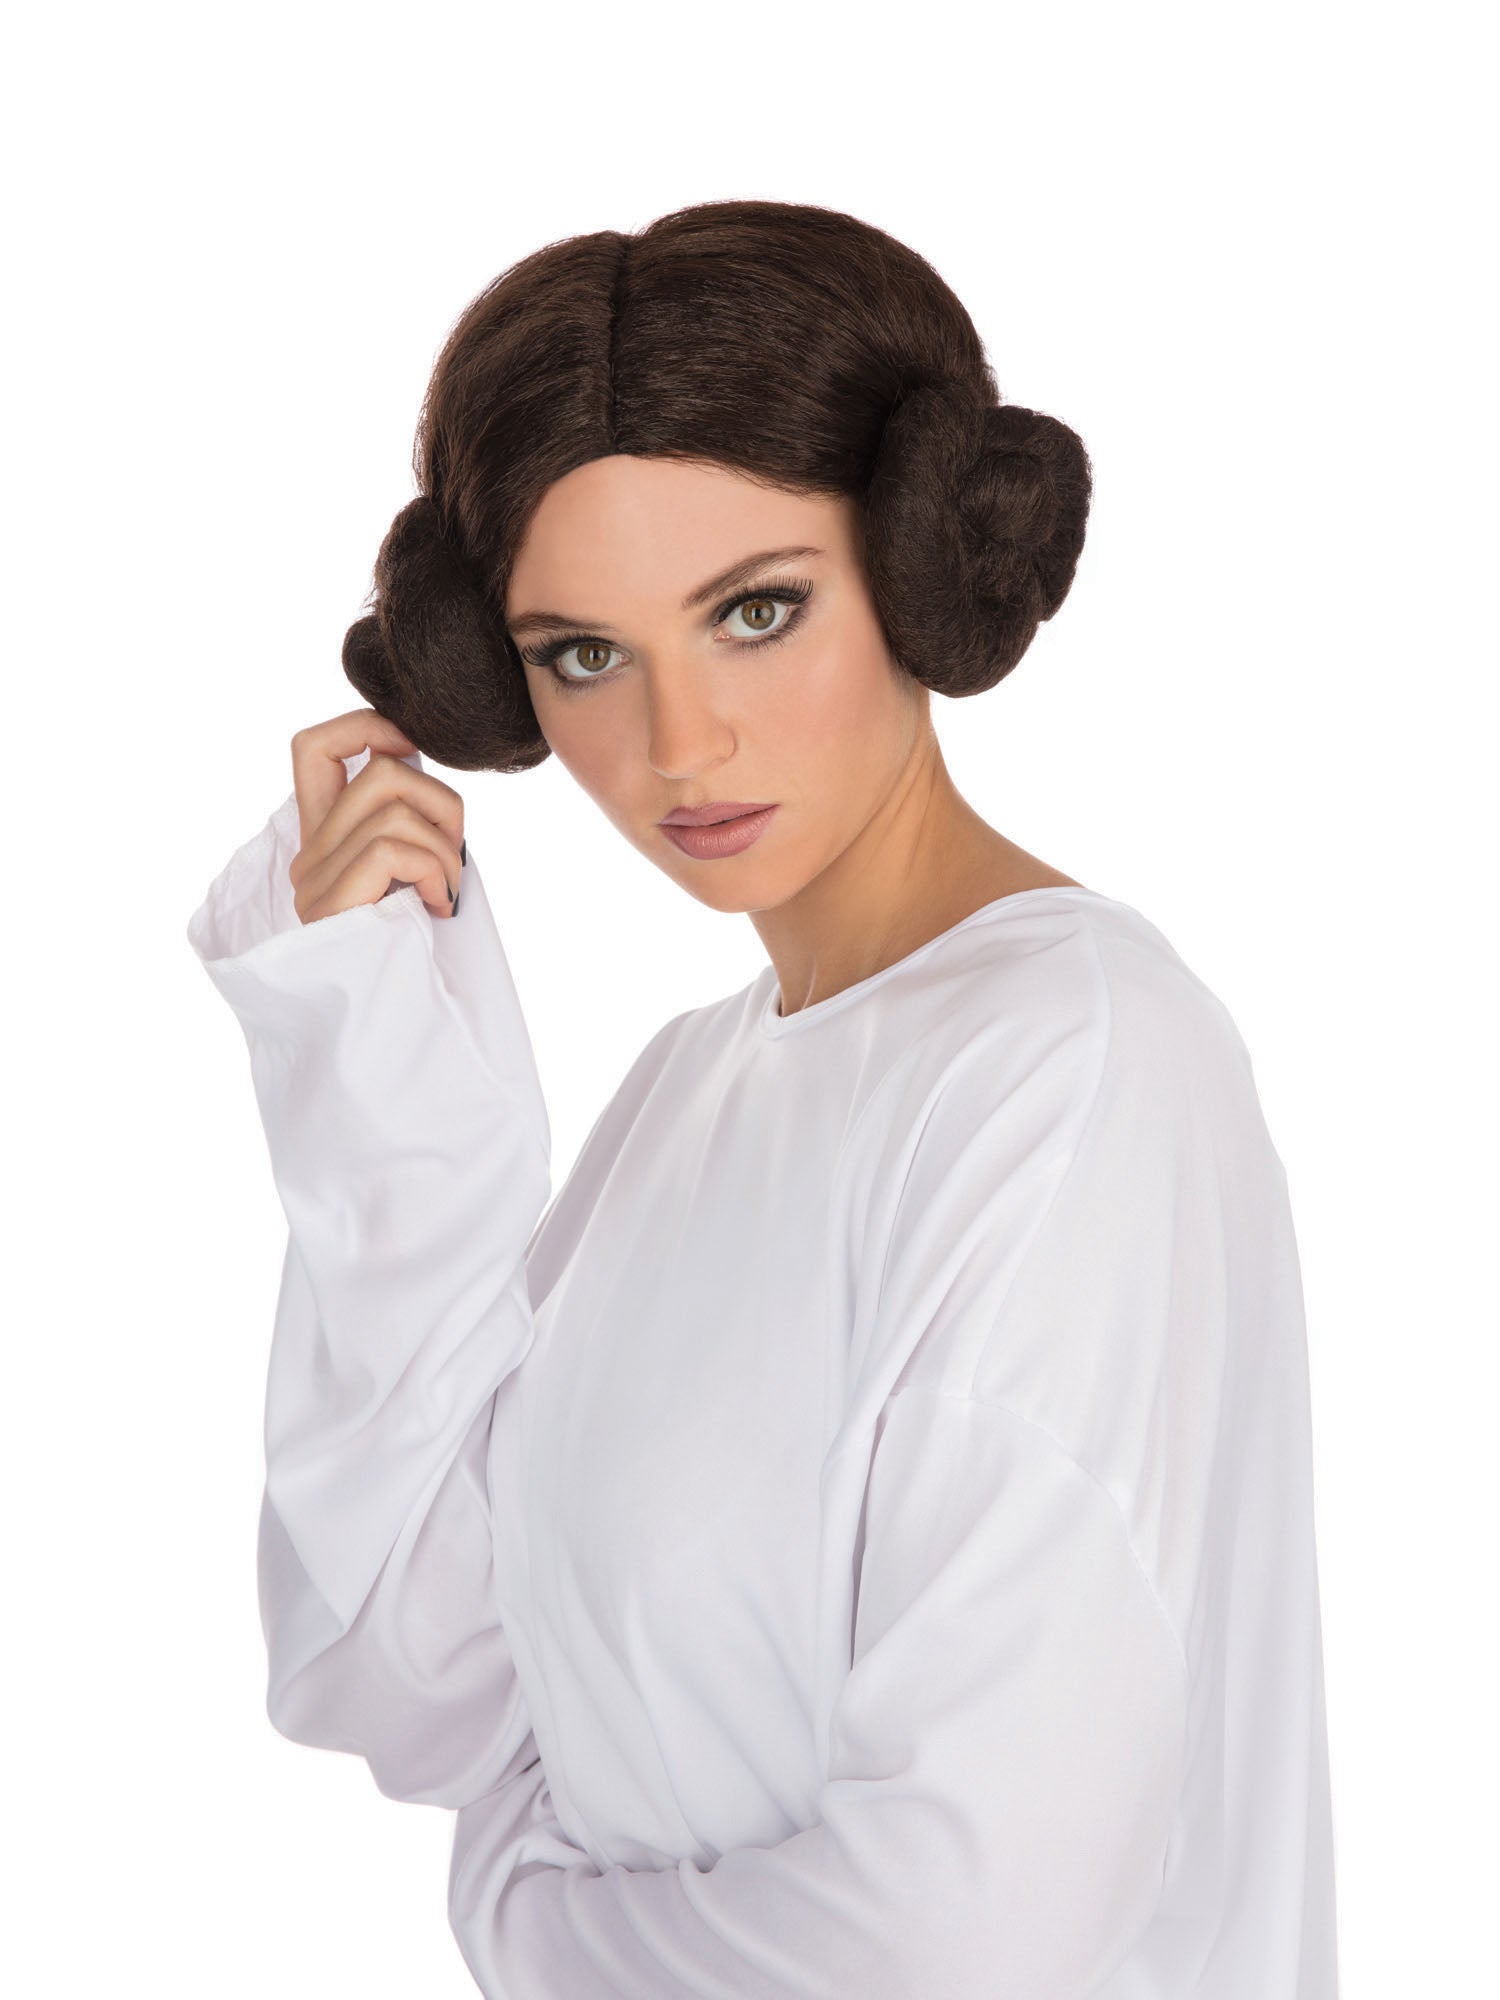 Space Princess, brown, Generic, Wig, One Size, Side